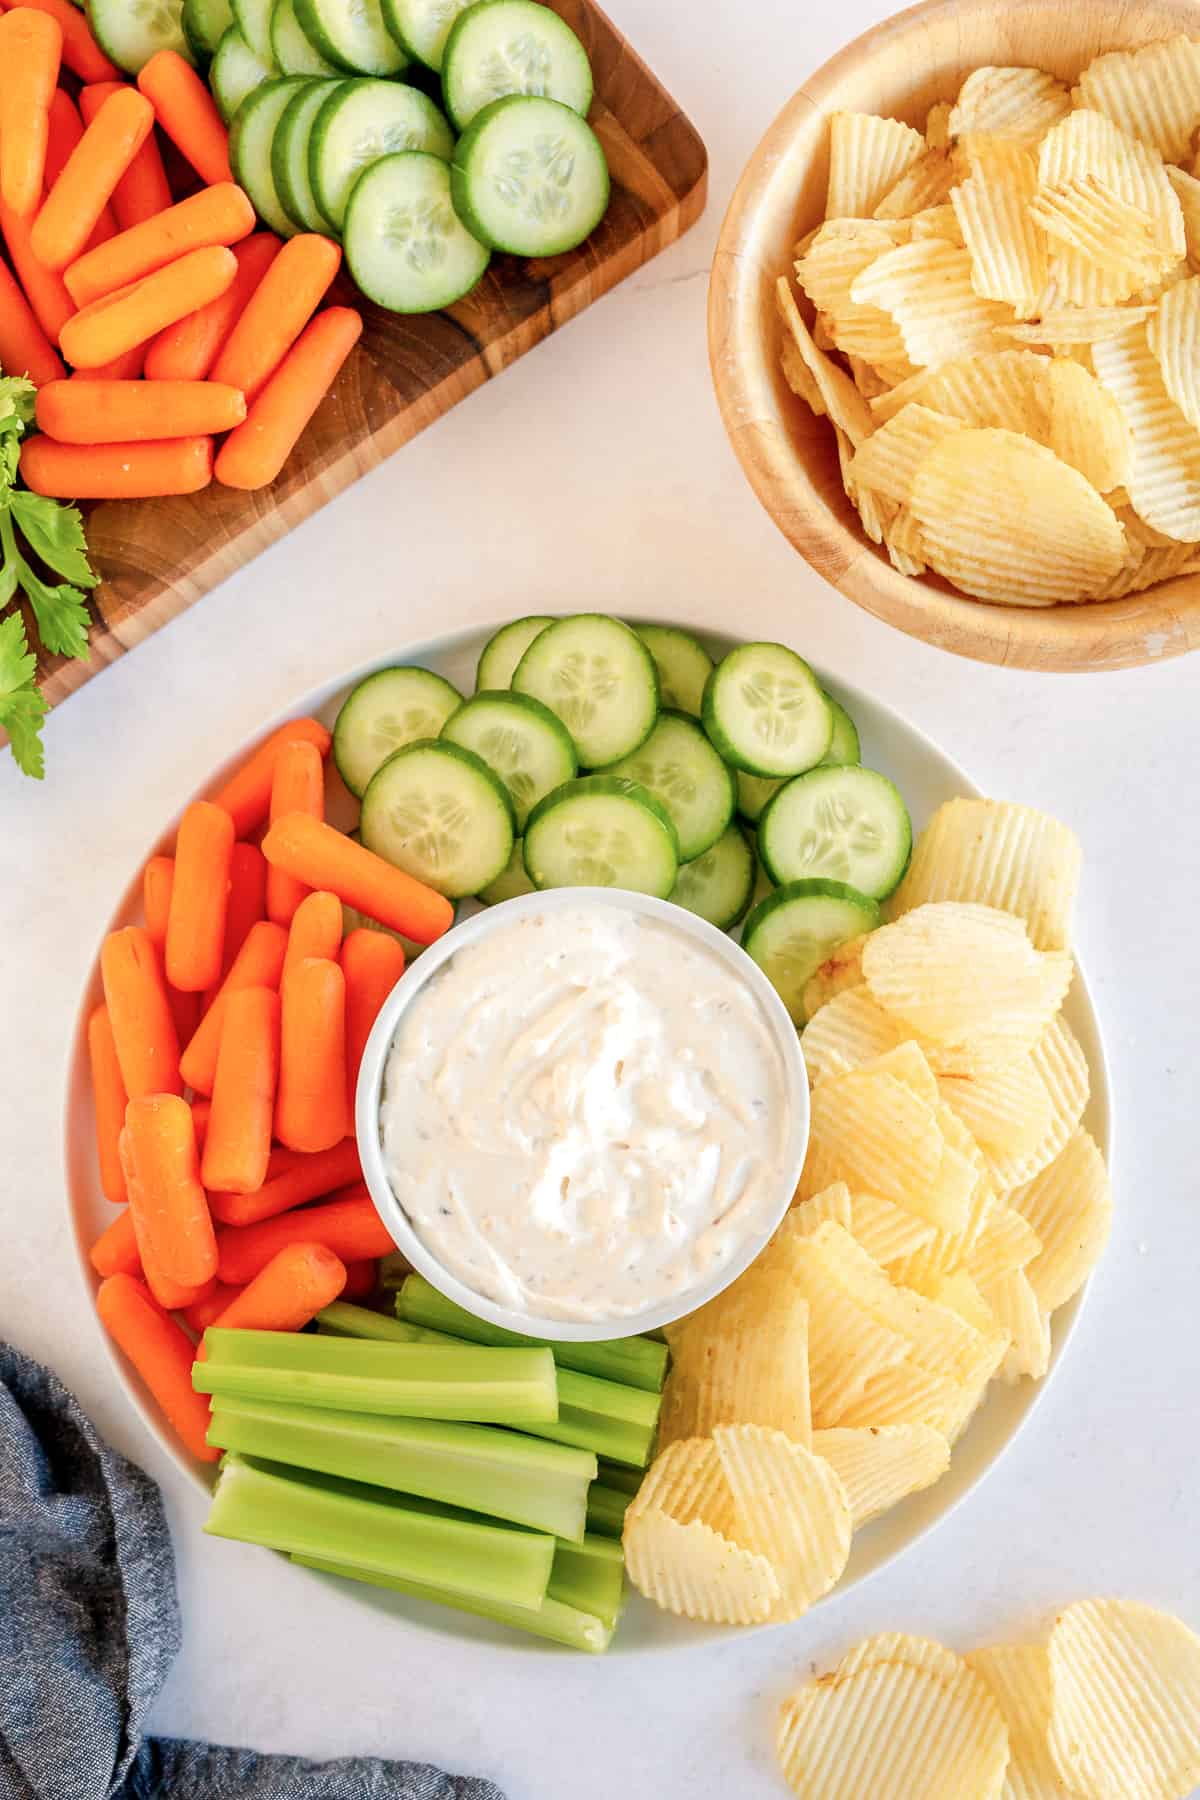 A platter of vegetables and Ruffles chips with dip in the center.